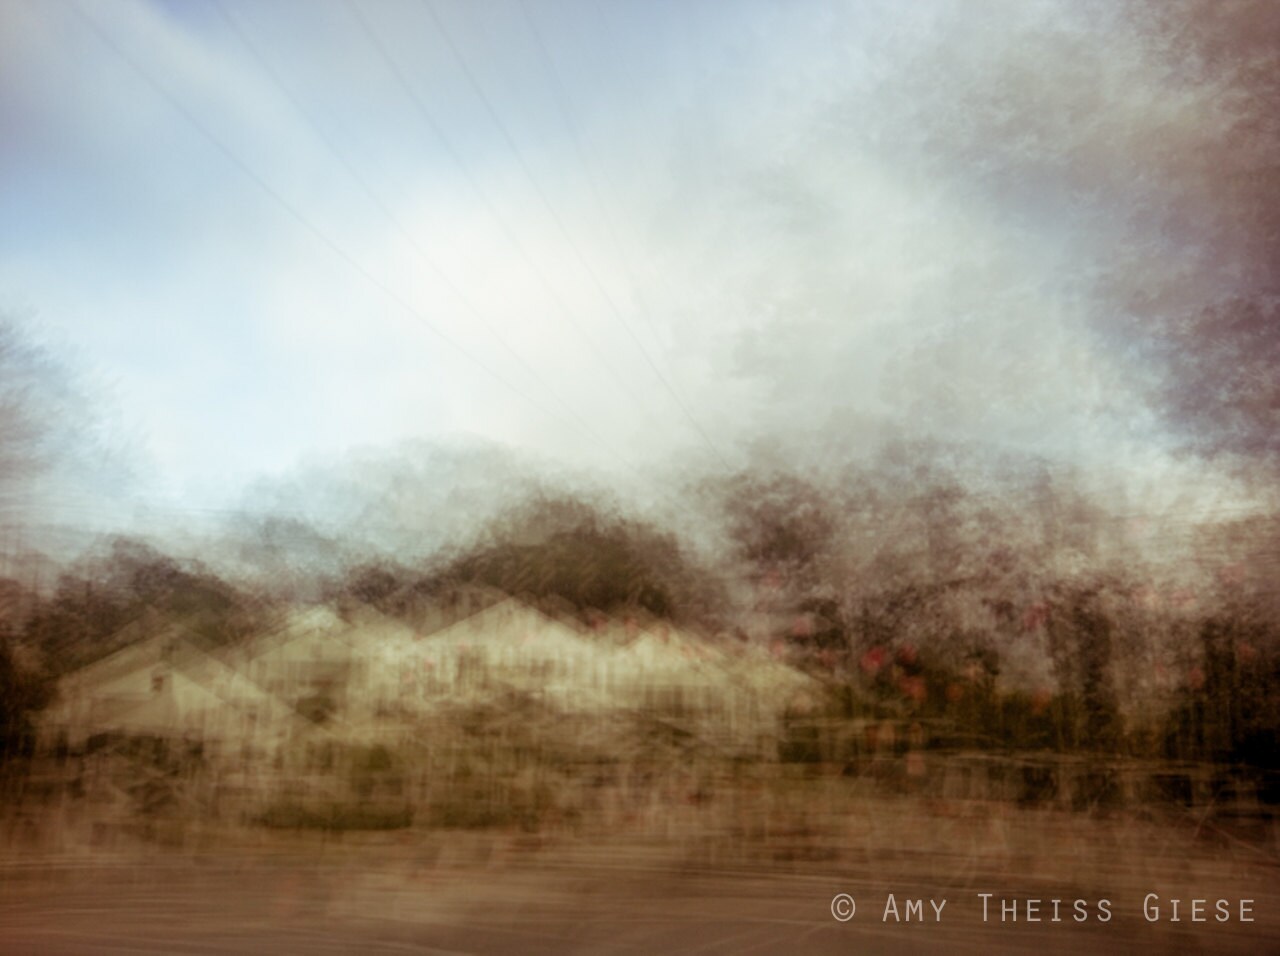 Abstract Landscapes Photography